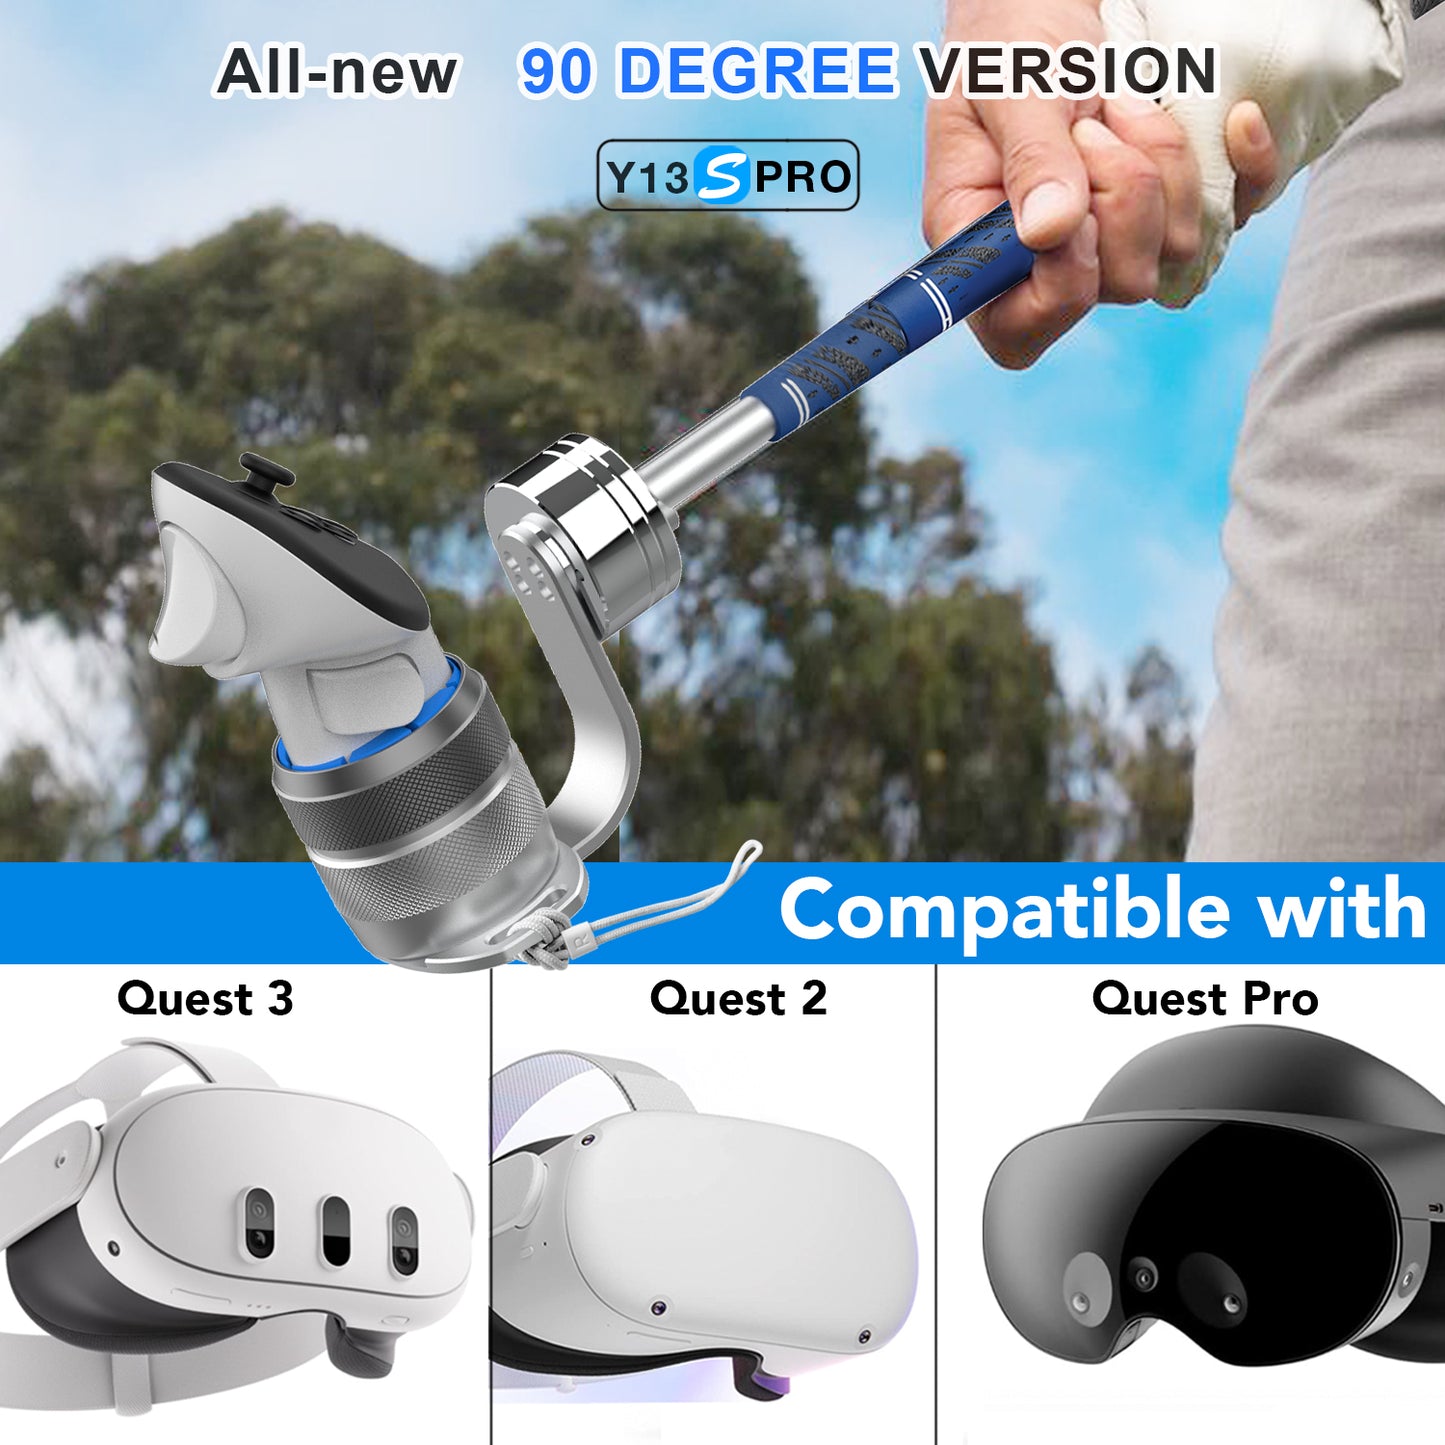 Weighted Golf Club Attachment for Meta Quest 3 | All new 90 DEGREE VERSION-Y13S